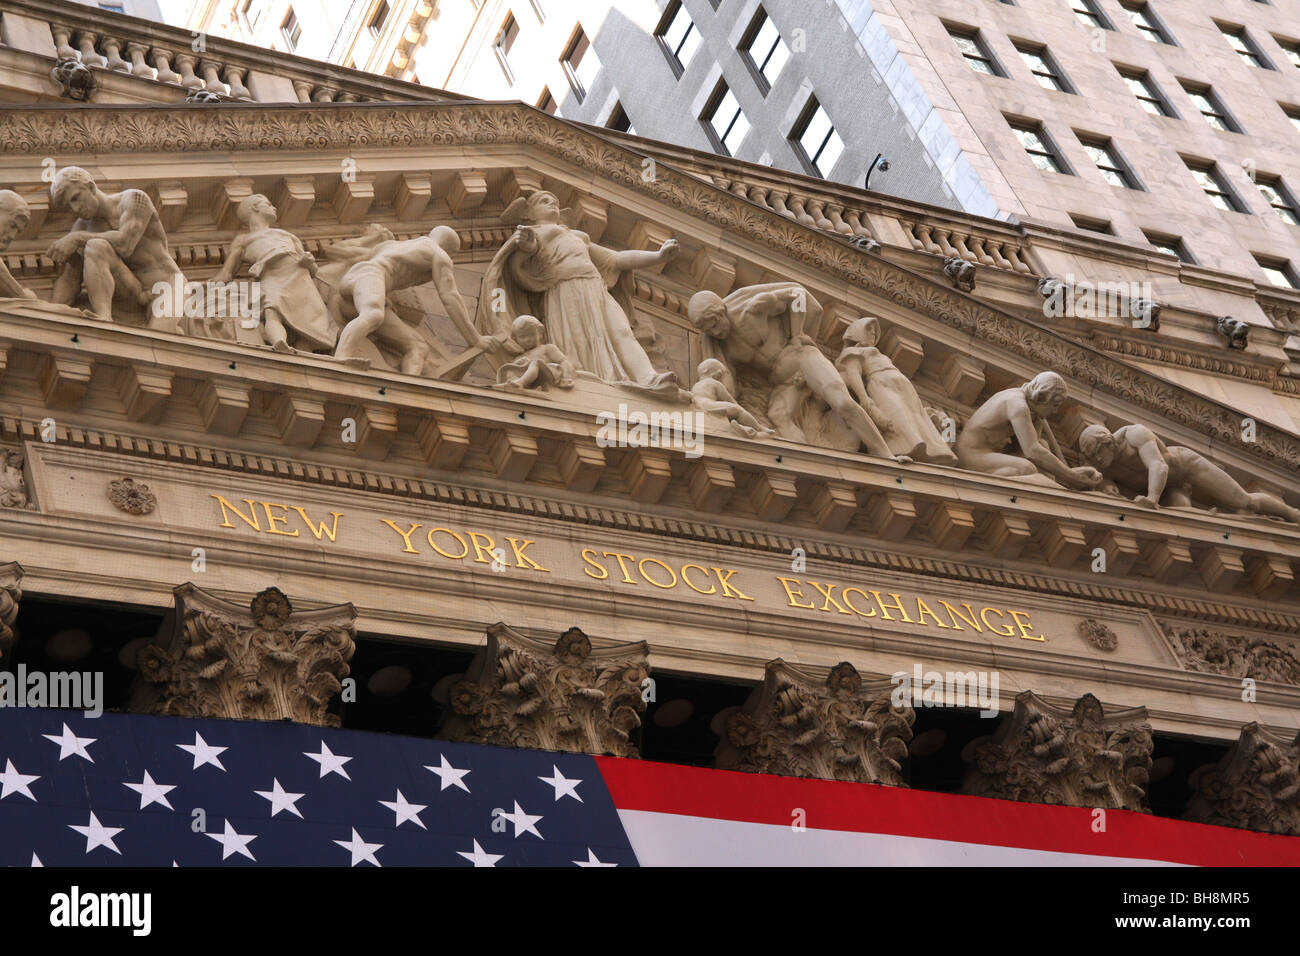 The New York Stock Exchange or The Big Board. Stock Photo